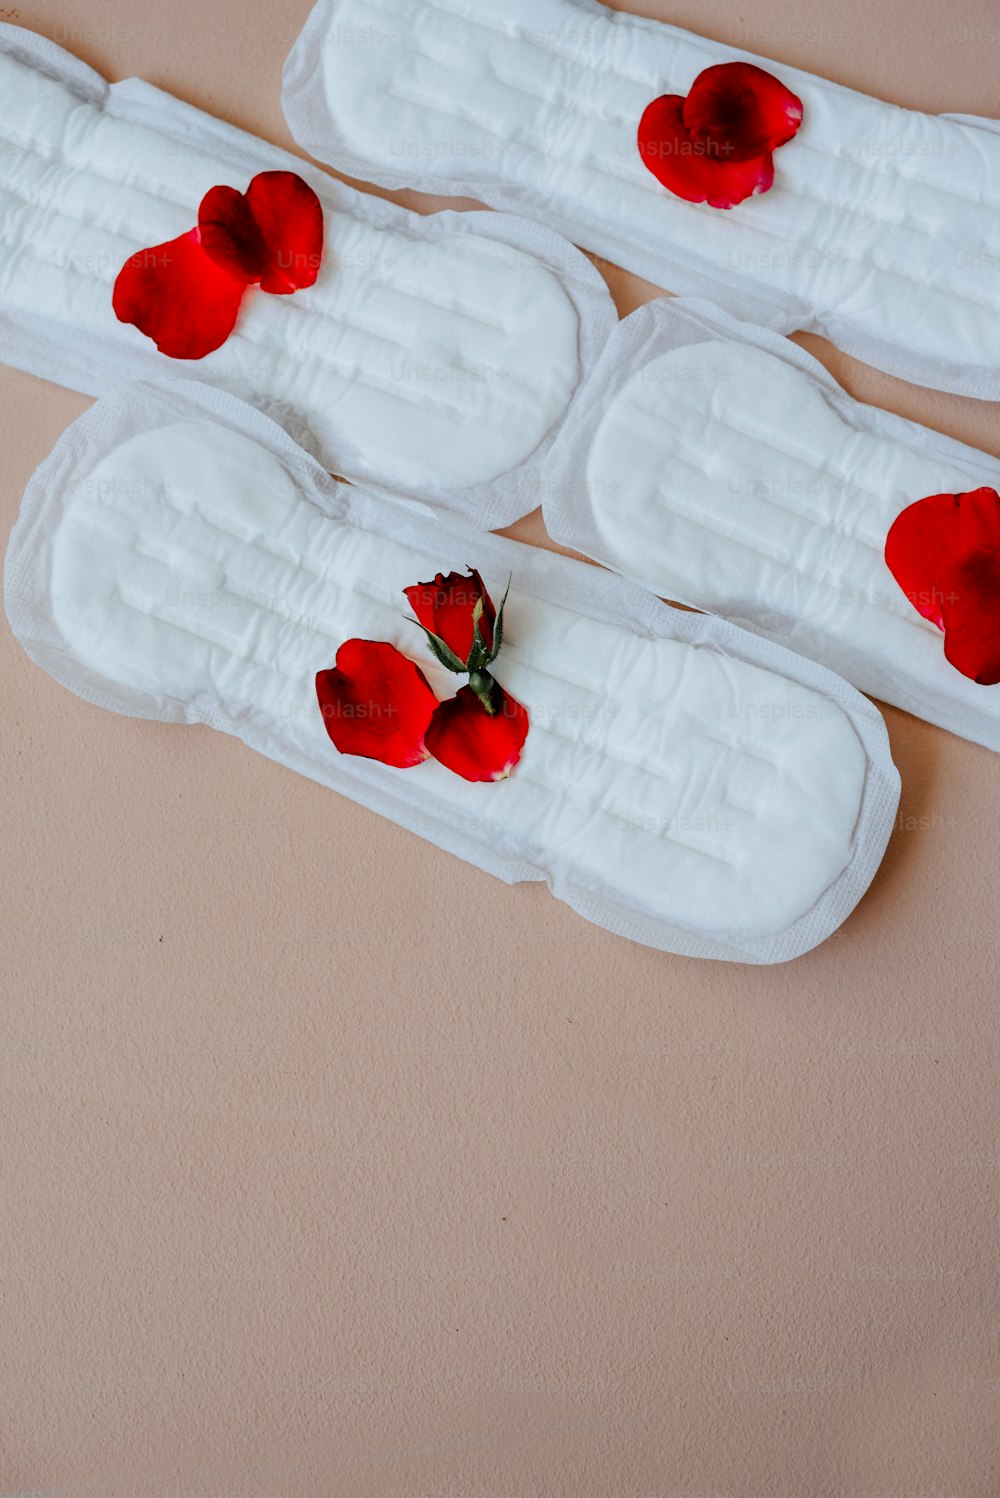 four pieces of white cake with red flowers on them